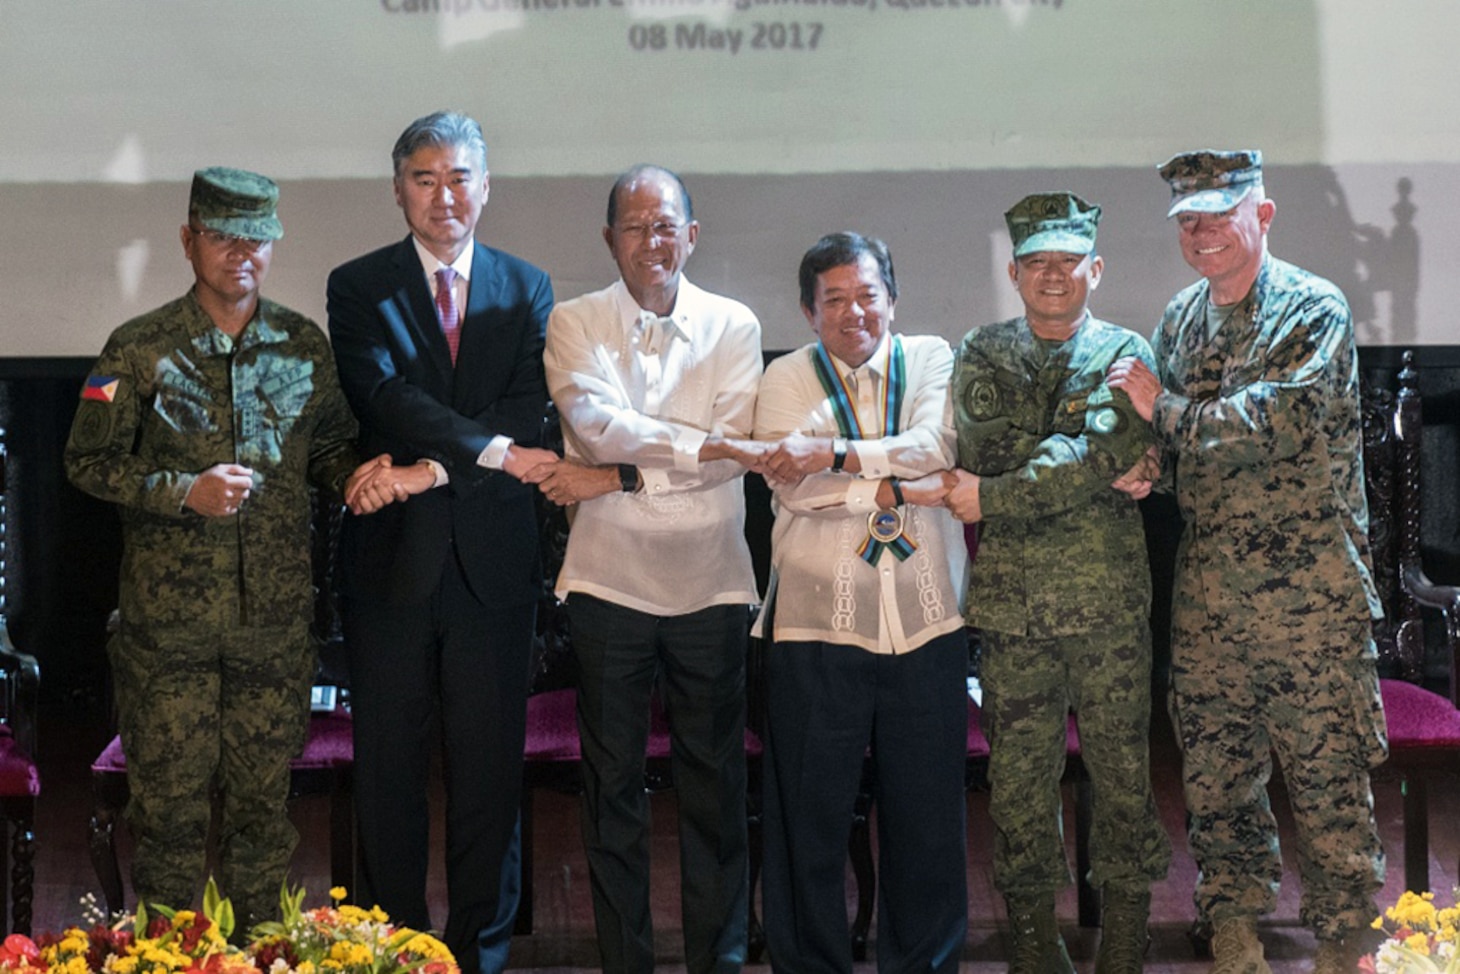 Armed Forces of the Philippines Lt. Gen. Oscar T. Lacto, left, The Honorable Ambassador Sung Y. Kim, Secretary Delfin N. Lorenzana, Under Secretary Ariel y. Abadilla, AFP Gen. Edruardo M. Año, and U.S. Marine Lt. Gen. Lawrence D. Nicholson stand “shoulder-to-shoulder” and shake hands during the opening ceremony for Balikatan 2017 at Camp Aguinaldo, Quezon City, May 8, 2017. Lacto is the Philippine exercise director for Balikatan. Kim is the U.S. Ambassador to the Philippines. Lorenzana is the Philippine Secretary of National Defense. Abadilla is the Philippine Undersecretary for Civilian Security and Consular Concerns. Año is the Chief of Staff of the AFP. Nicholson is the commanding general of III Marine Expeditionary Force. Balikatan is an annual U.S.-Philippine bilateral military exercise focused on a variety of missions including humanitarian and disaster relief, counterterrorism, and other combined military operations.